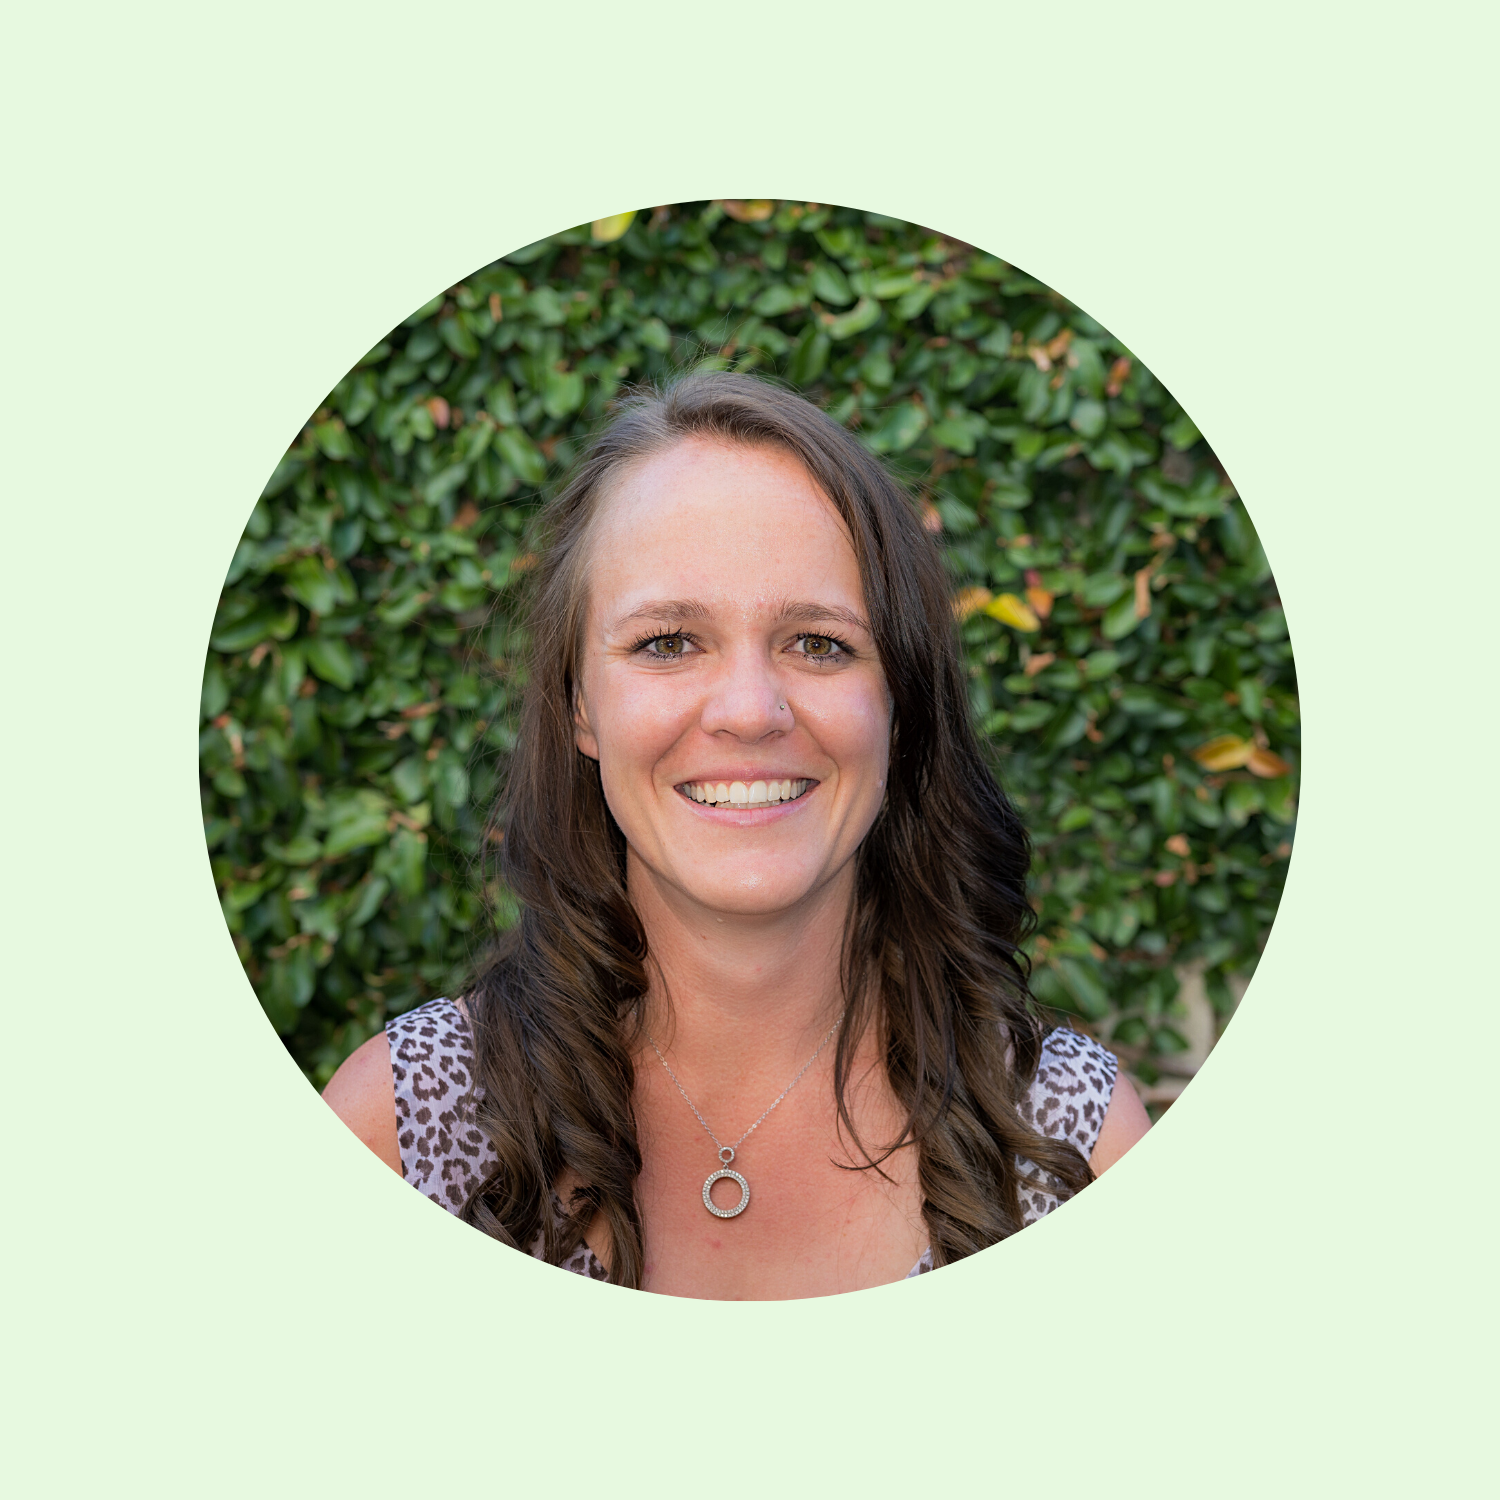 Paige West Neurological Integration System Practitioner Waikato. Neuro Link Practitioner. Neuro Practitioner. Paige West Waikato. Paige West Neuro Touch. Neuro Touch treatments. Neuro Link Treatments. Treating the brain. Natural Health Practitioner 